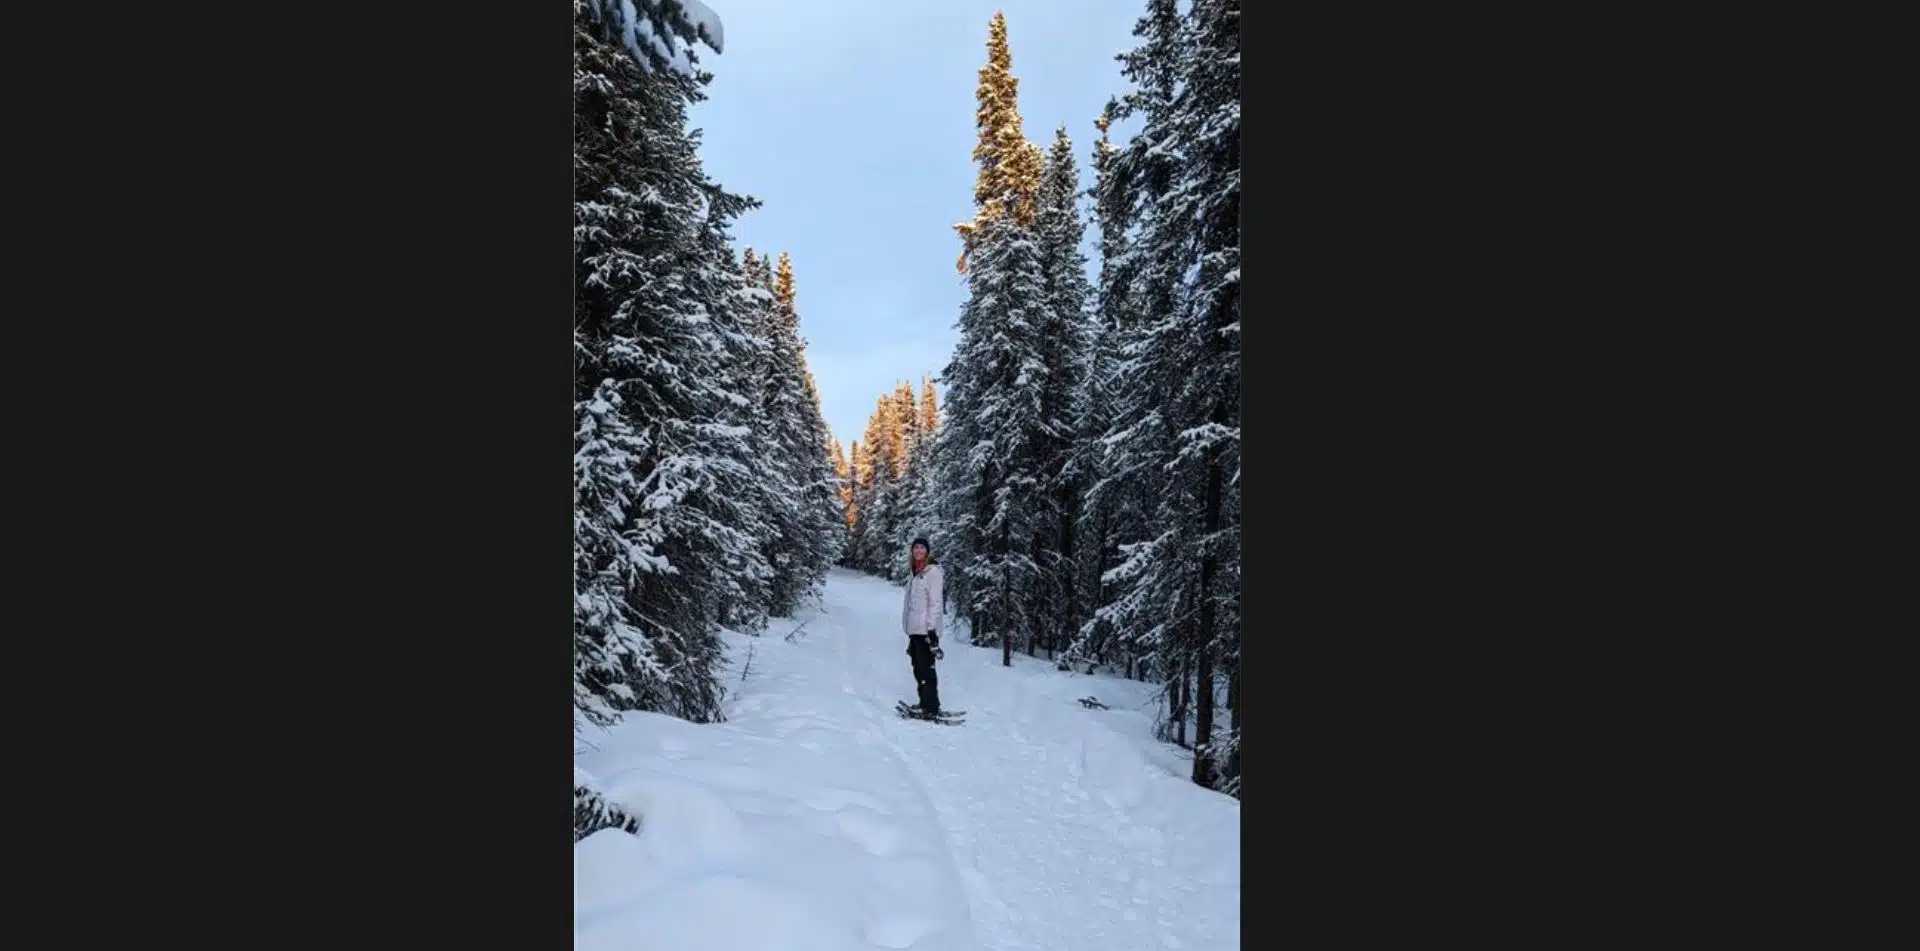 Snowshoe through the forest in Alaska